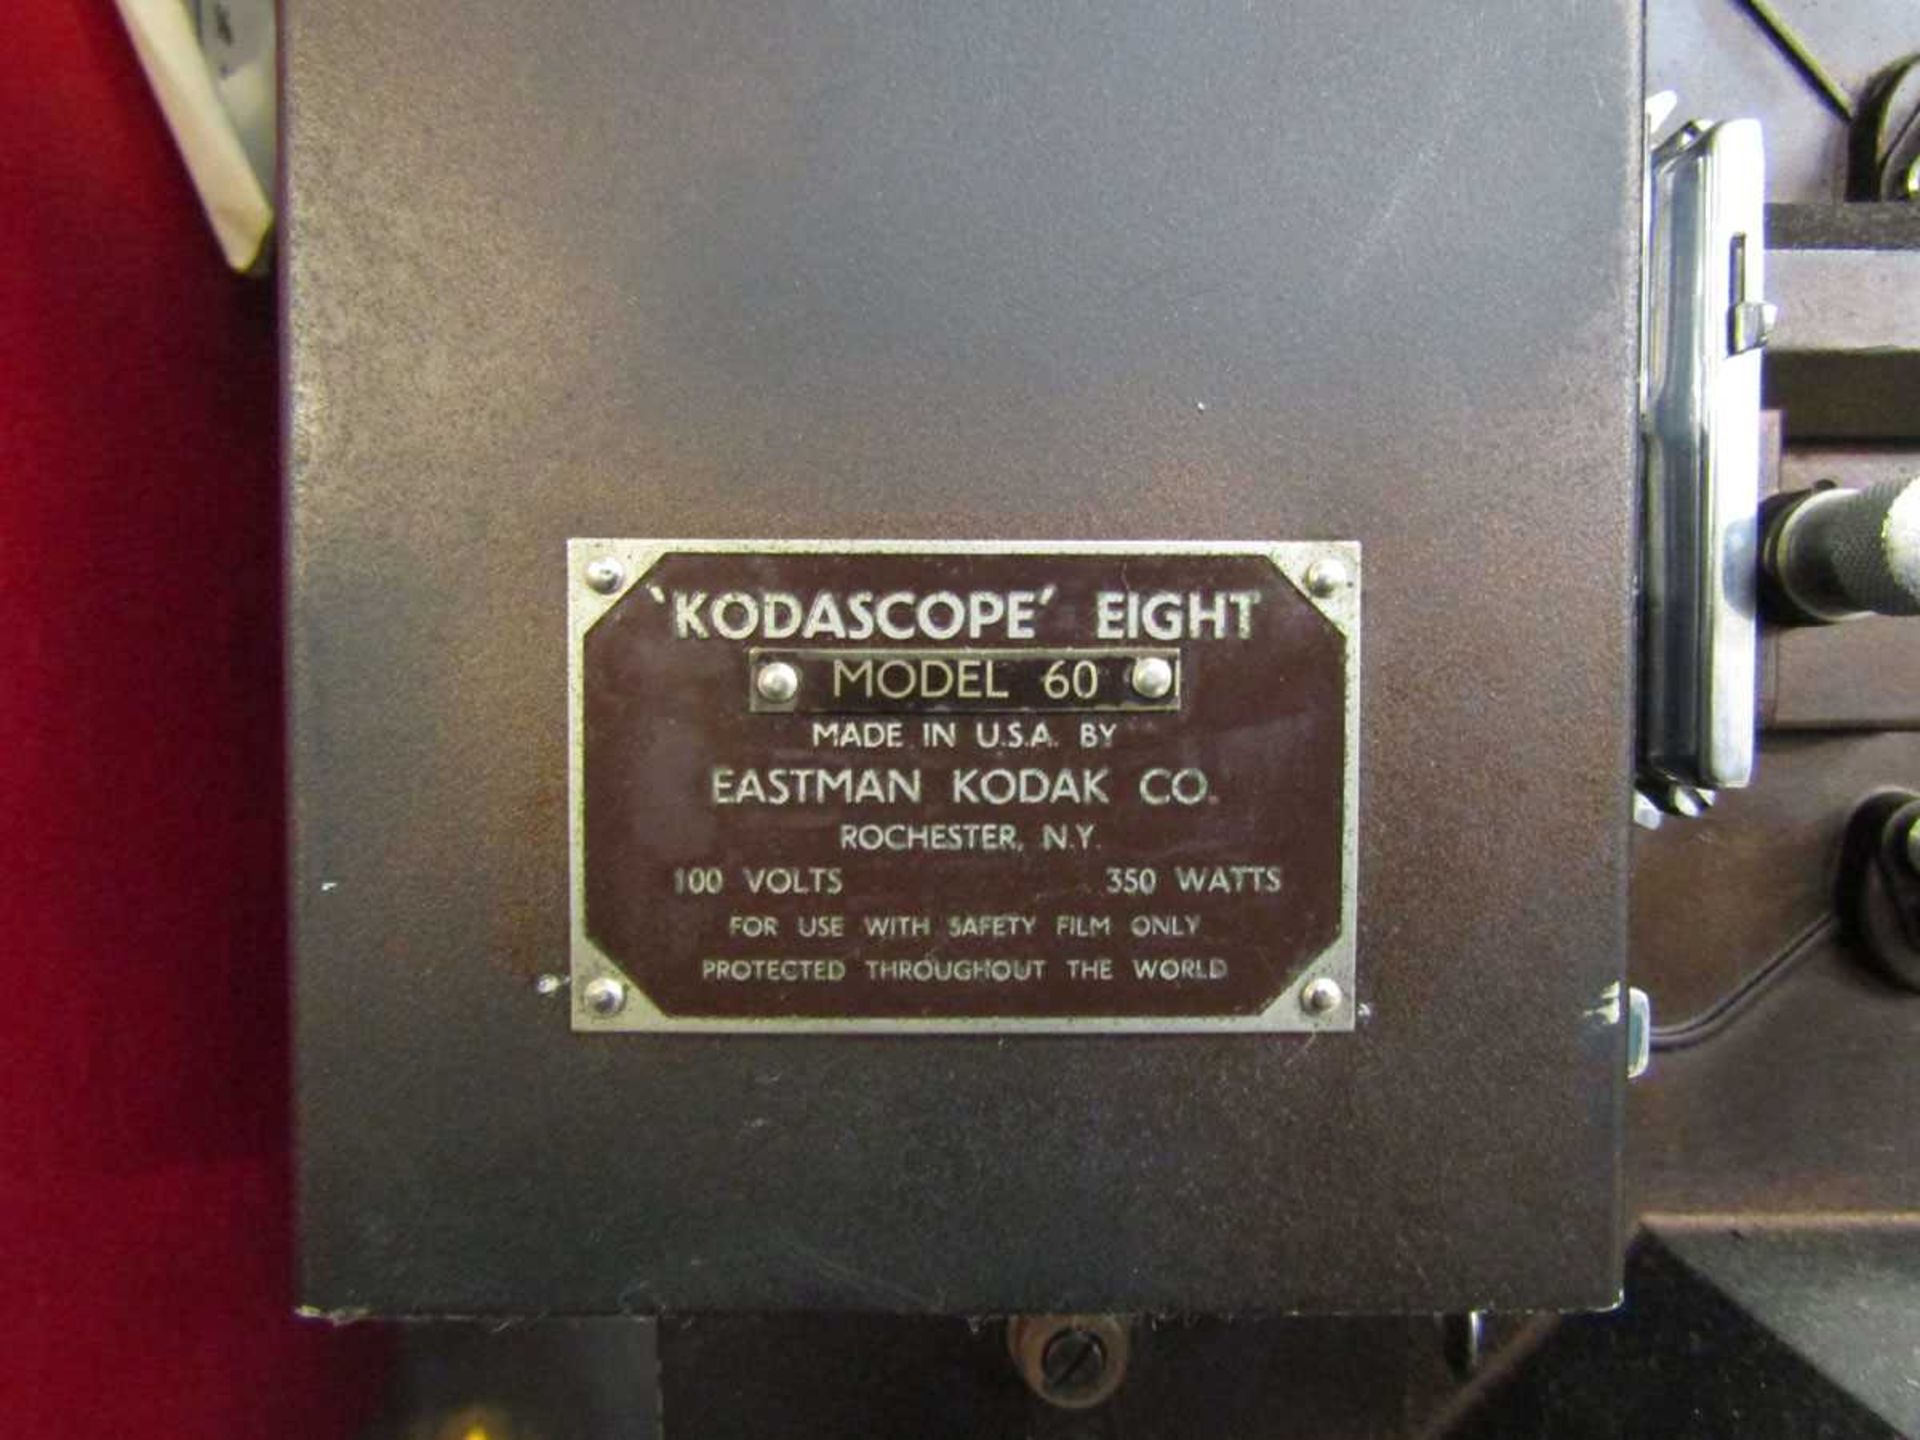 A cased Kodascope 8 model 60 projector for 8mm film - Image 2 of 2